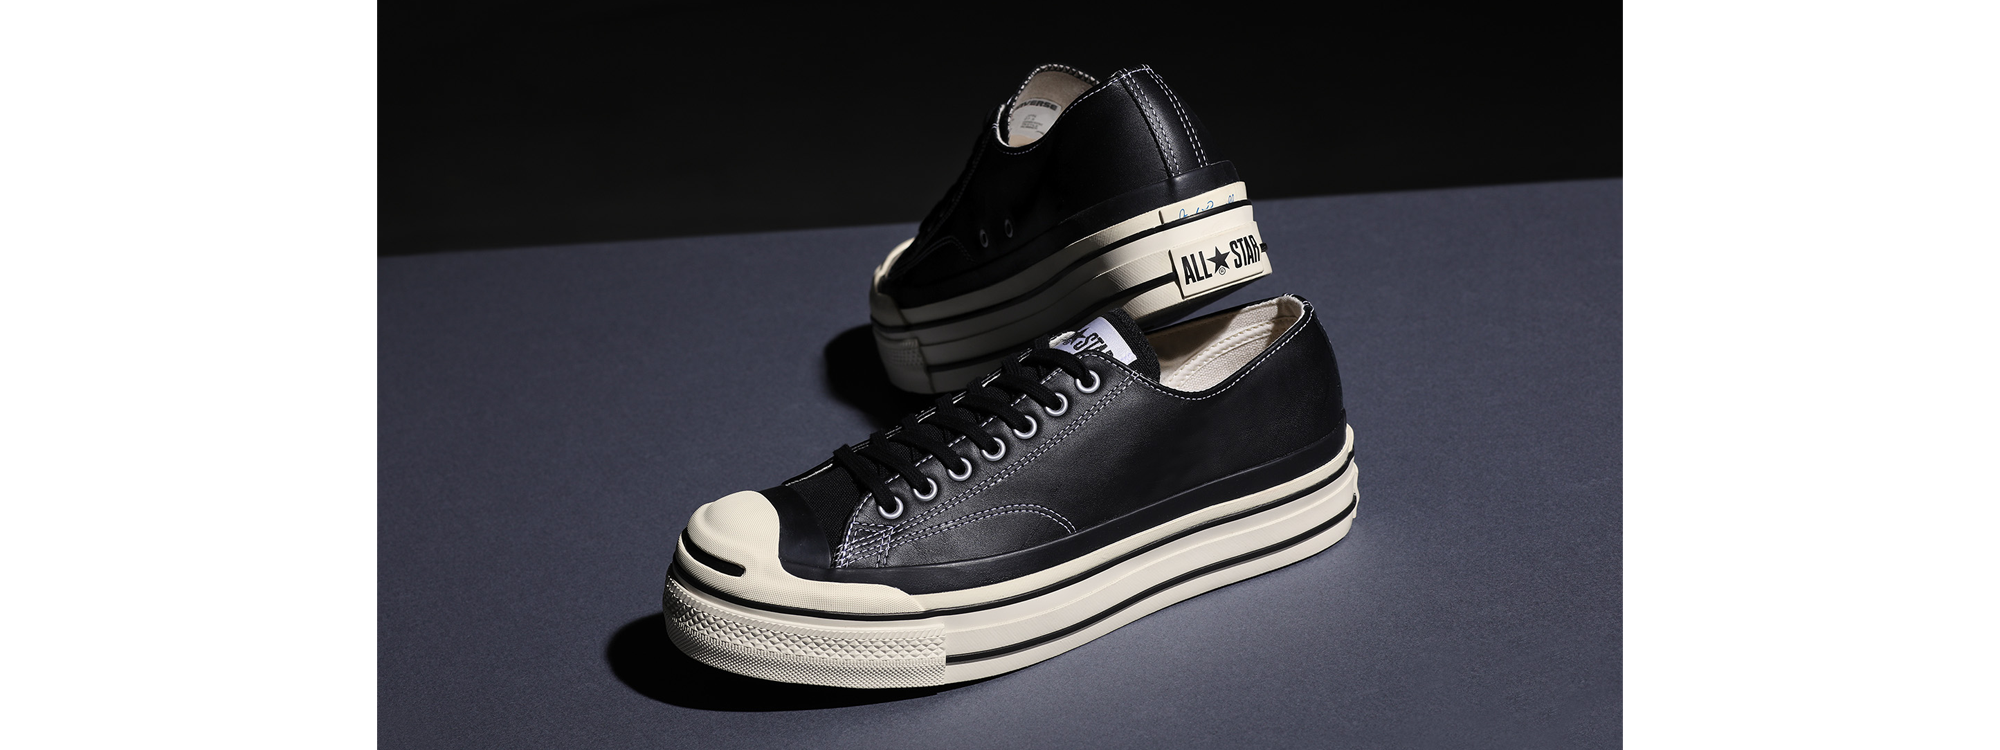 doublet × Converse Jack Purcell All Starサイズ275 - kso-press.ru